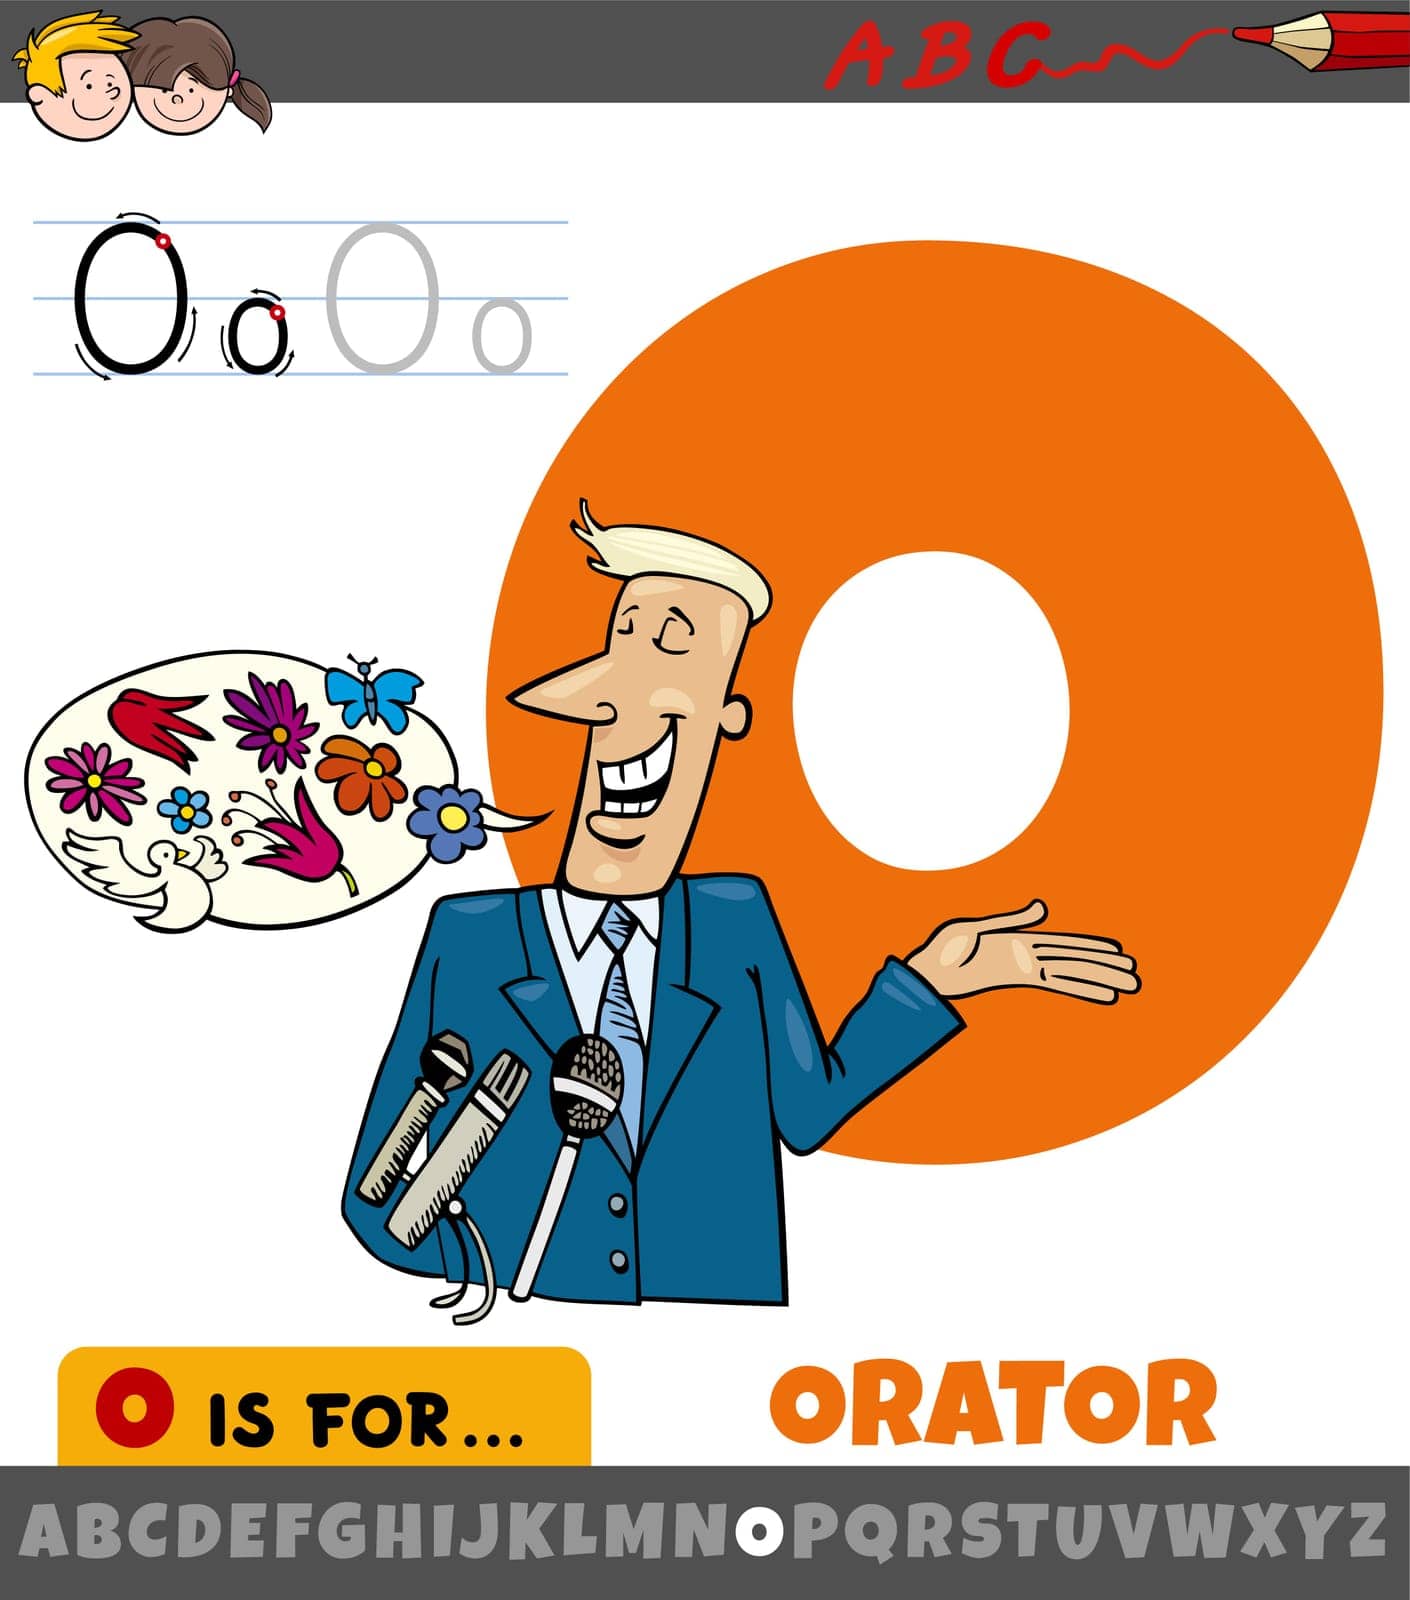 letter O from alphabet with orator character by izakowski